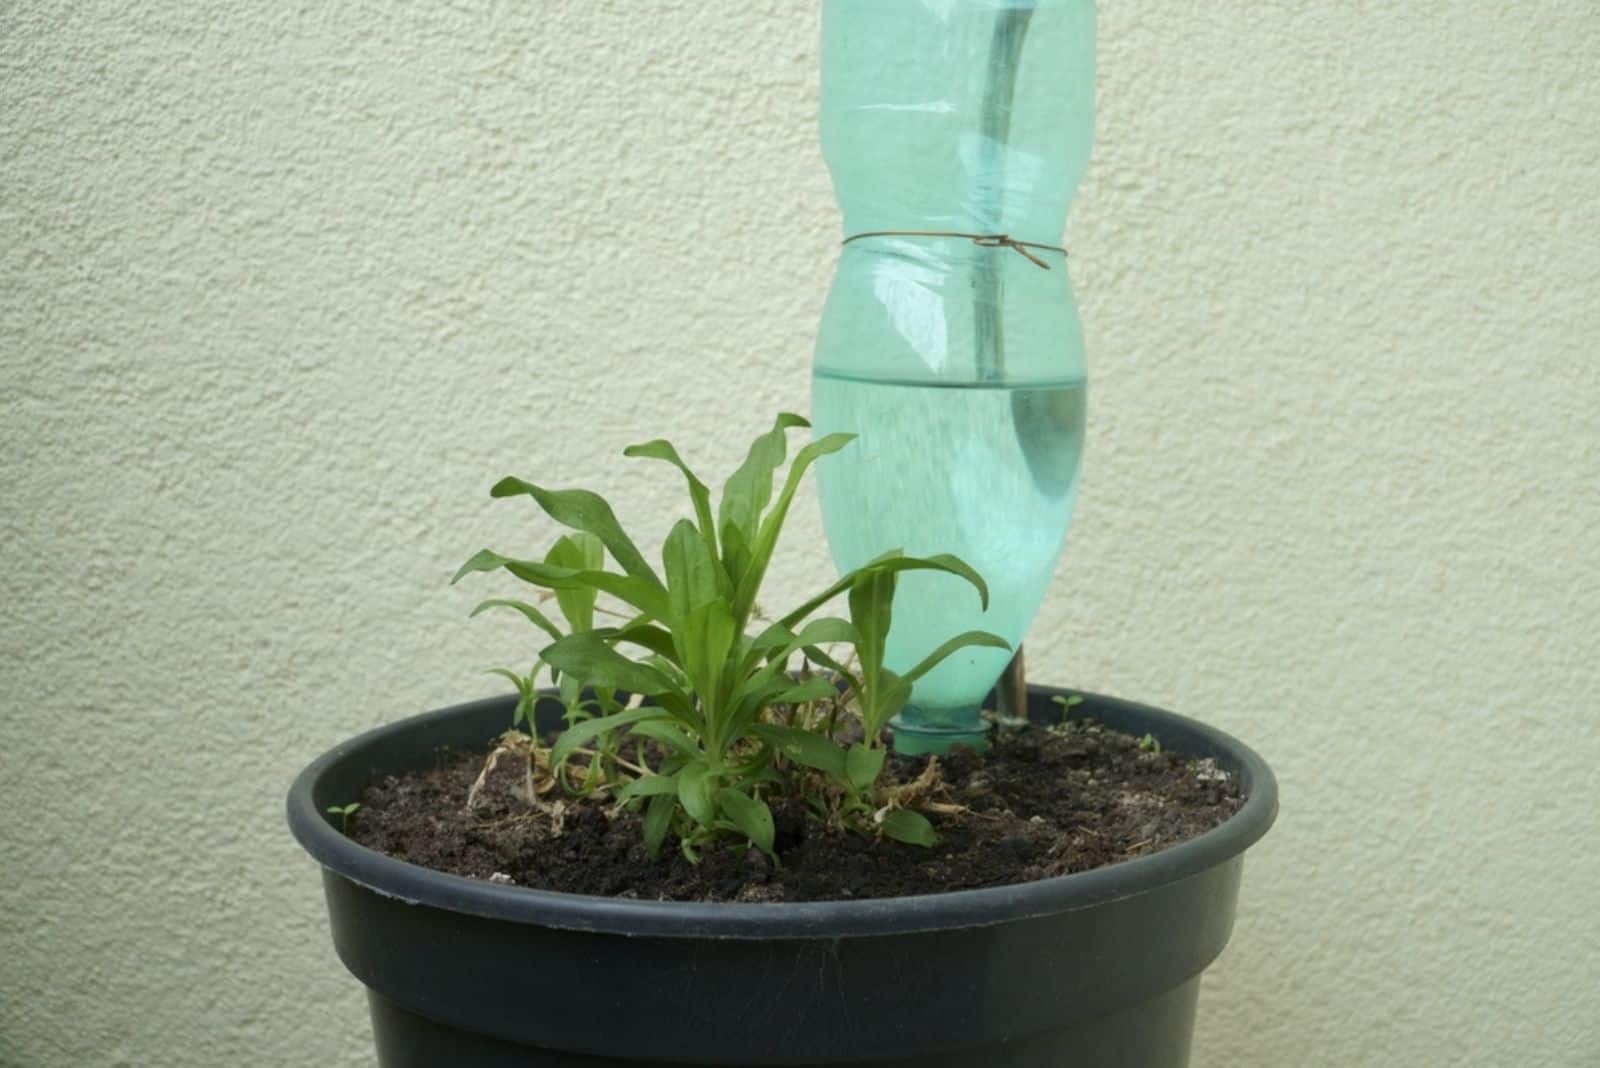 Potted plants watering system using a PET bottle